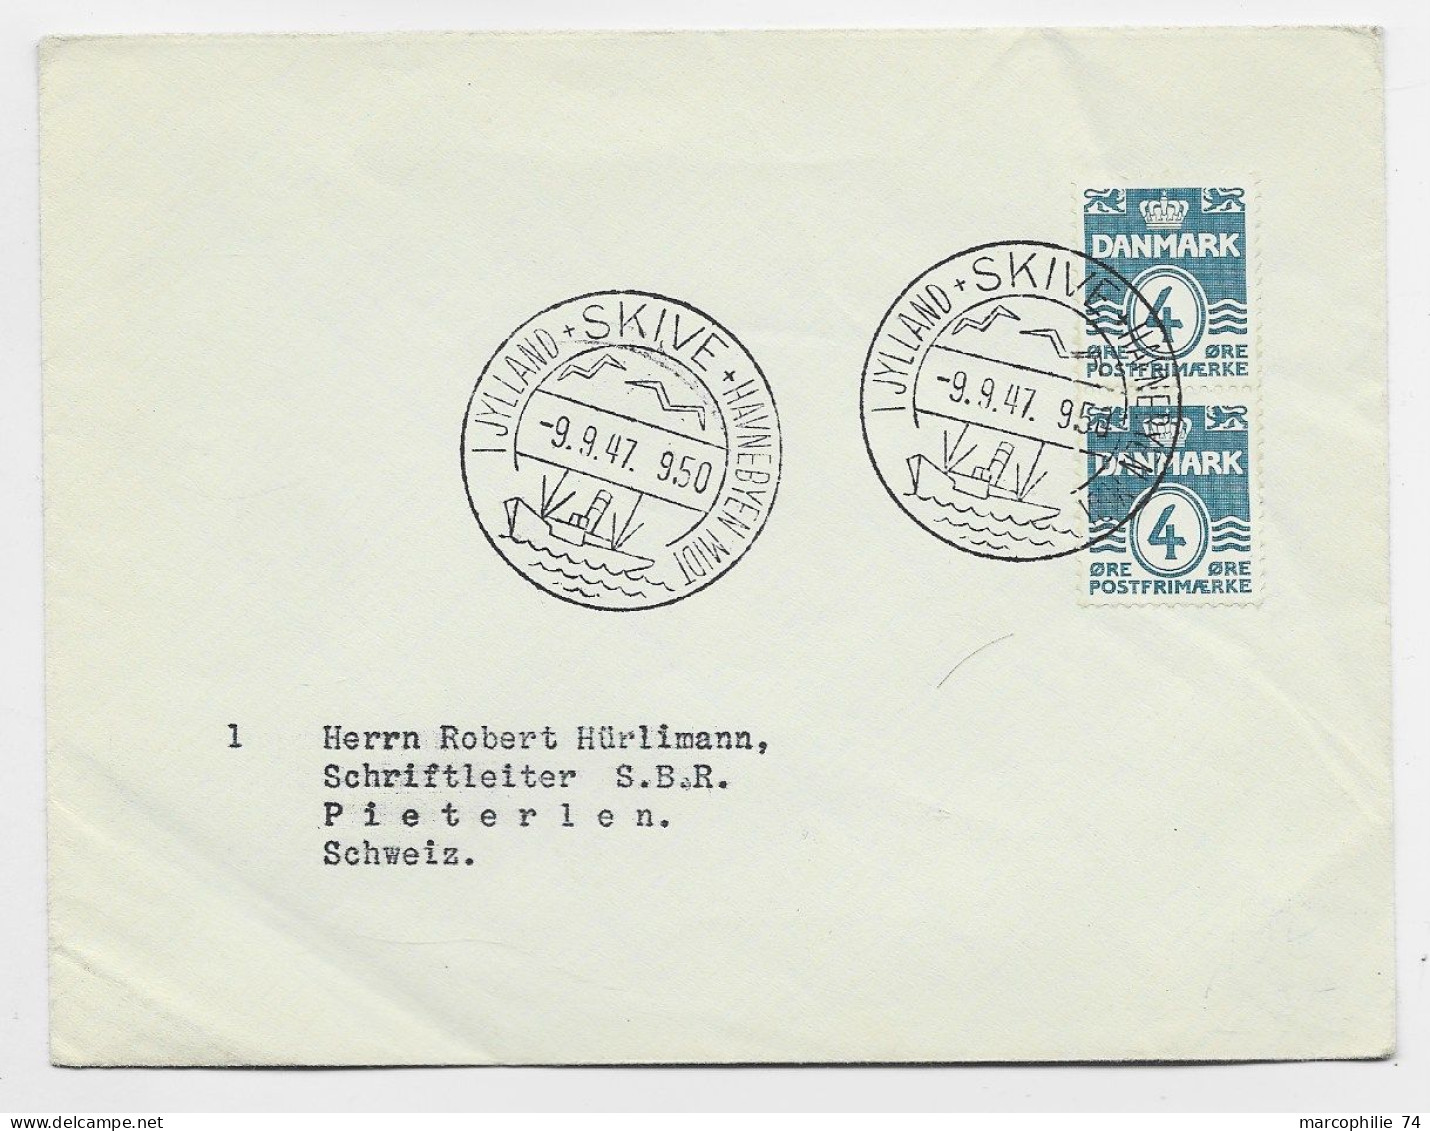 DANMARK 4 ORE X2 LETTRE COVER IJYLIAND SKIVE HAVNEBYEN MIDT 9.9.1947 BOAT TP SUISSE - Covers & Documents